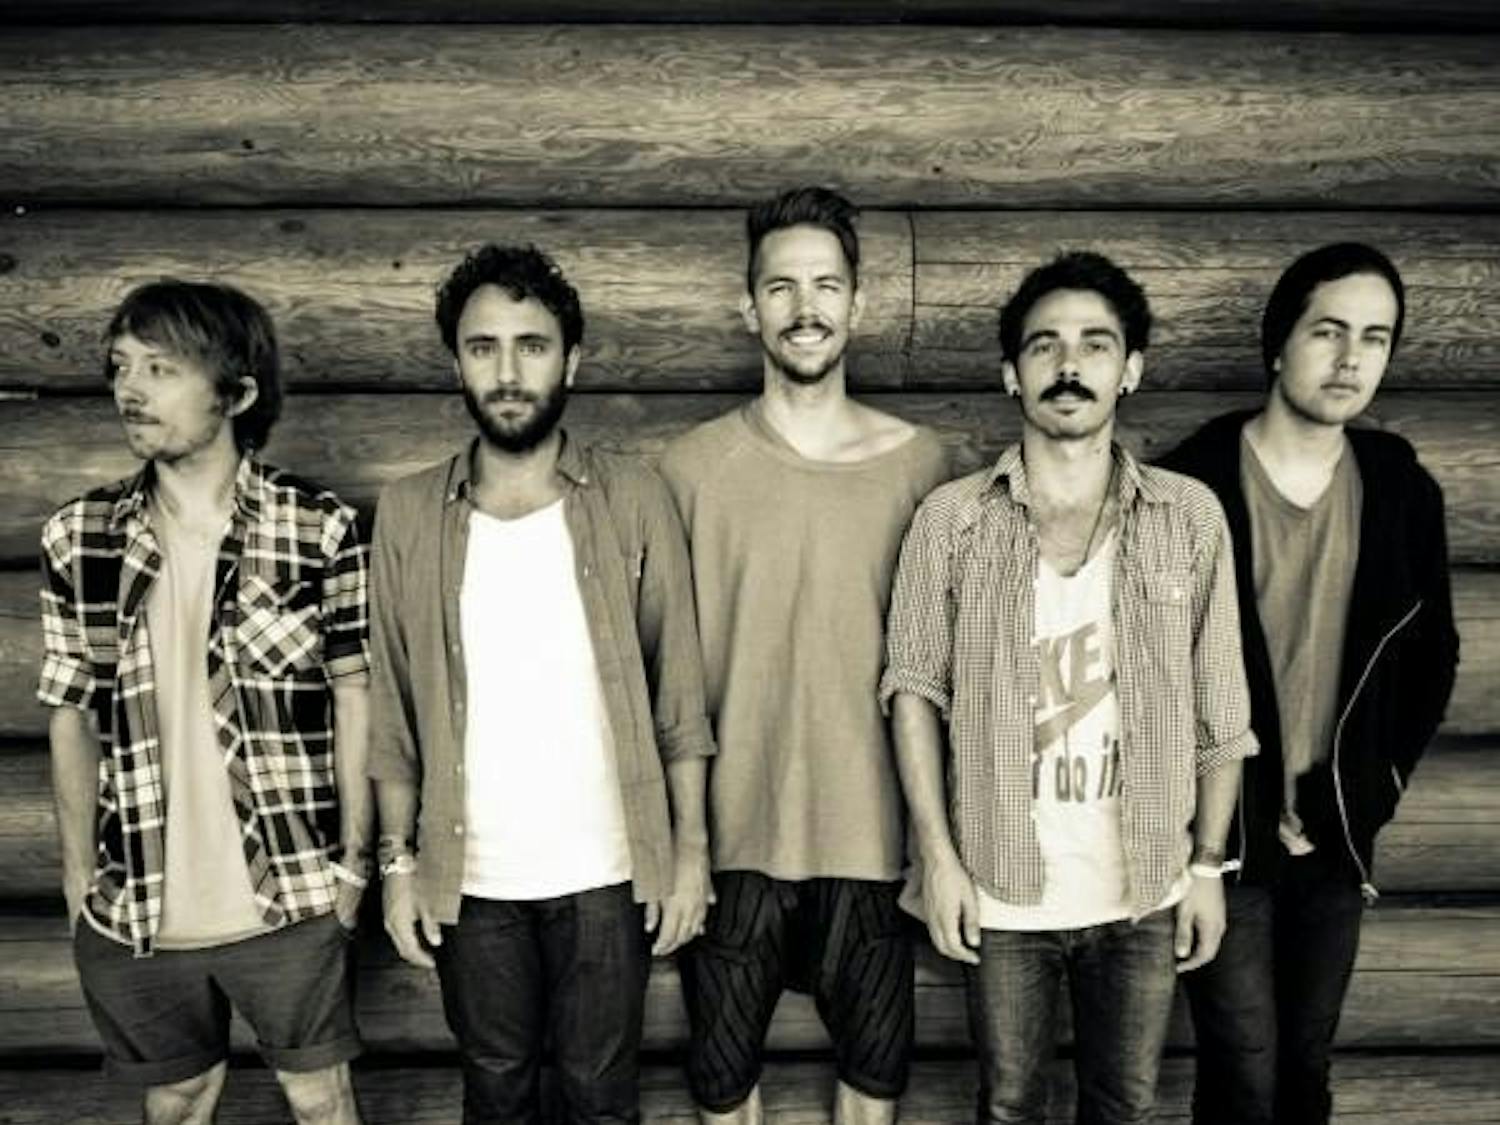 GOING 'NATIVE': Band Local Natives released its debut album "Gorilla Manor" this year, and, after having played several festivals, will start their coast to coast tour in September. (Photo Courtesy of Kyle Johnson)